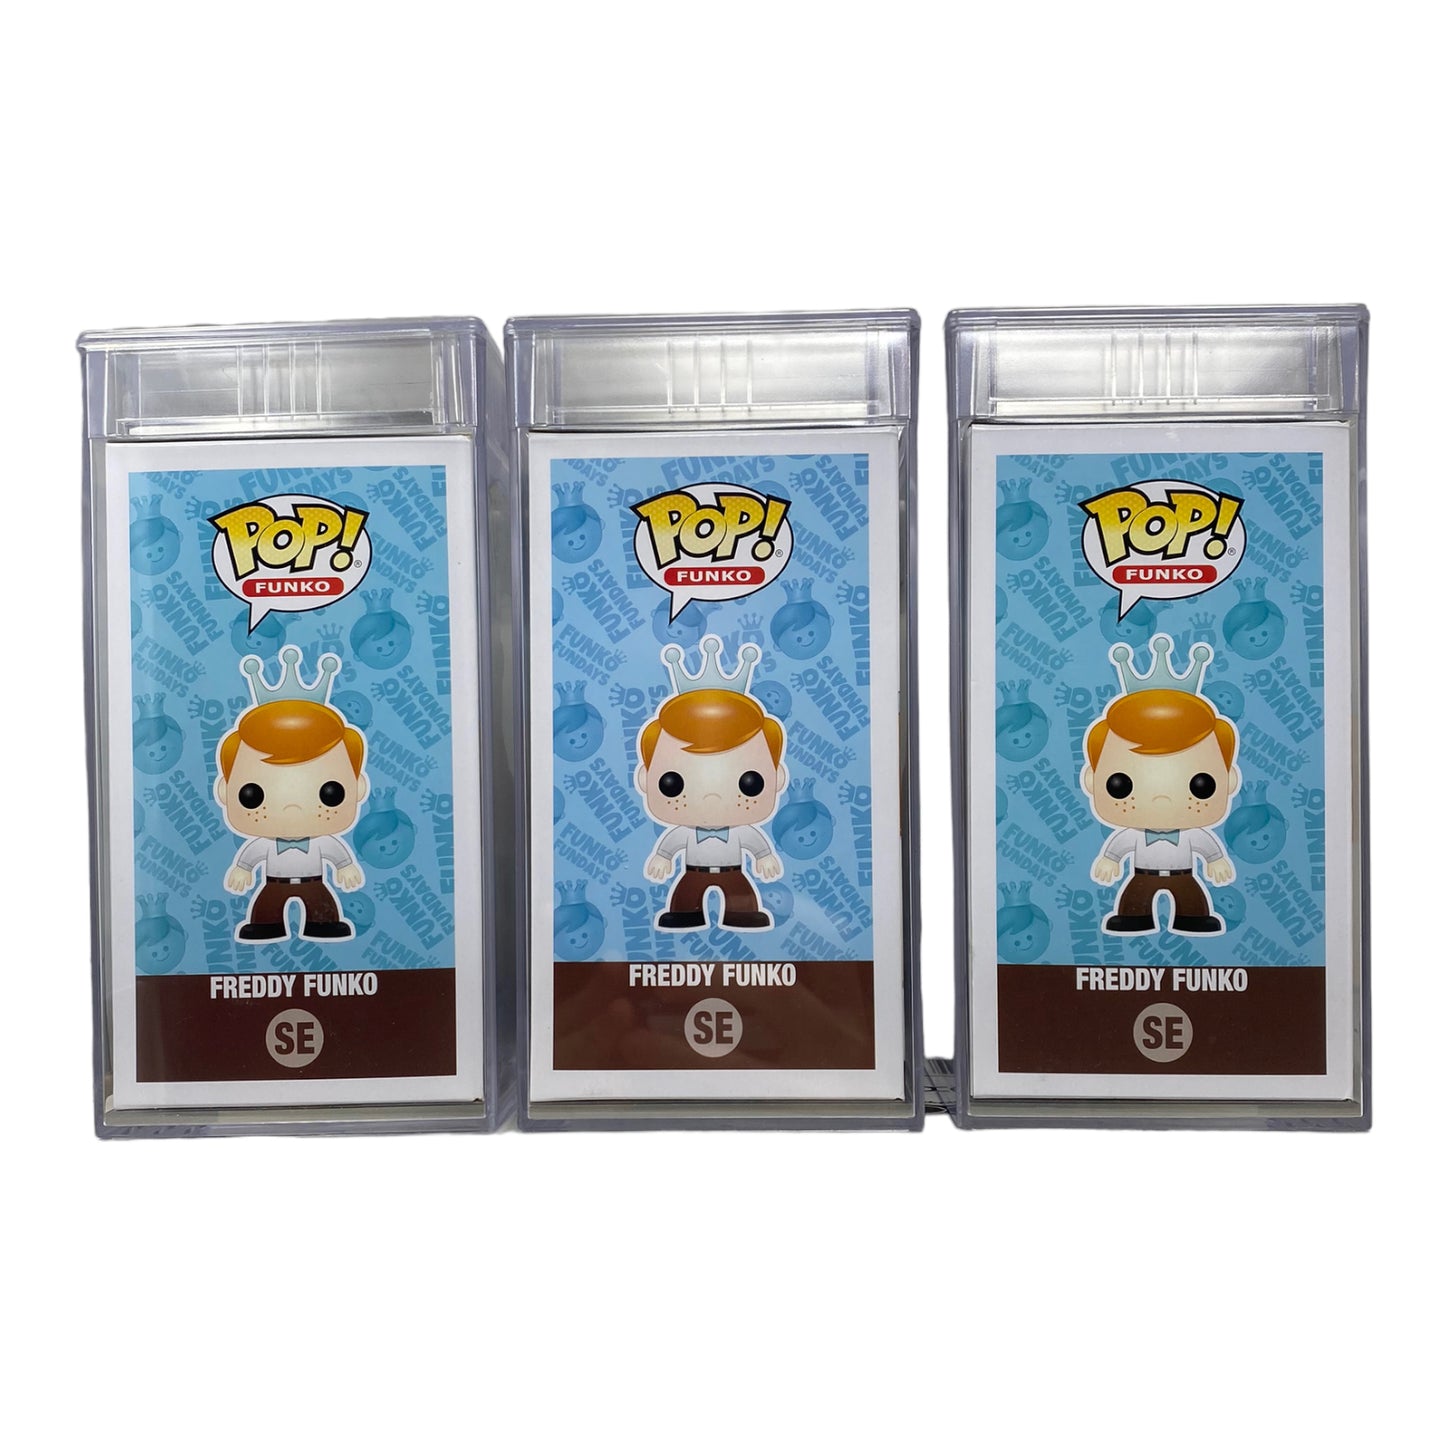 Sequentially PSA Graded - Freddy Funko as Rangers Set, 2017 SDCC 525 pcs 8.5 red 8.5 blue 9 white ranger